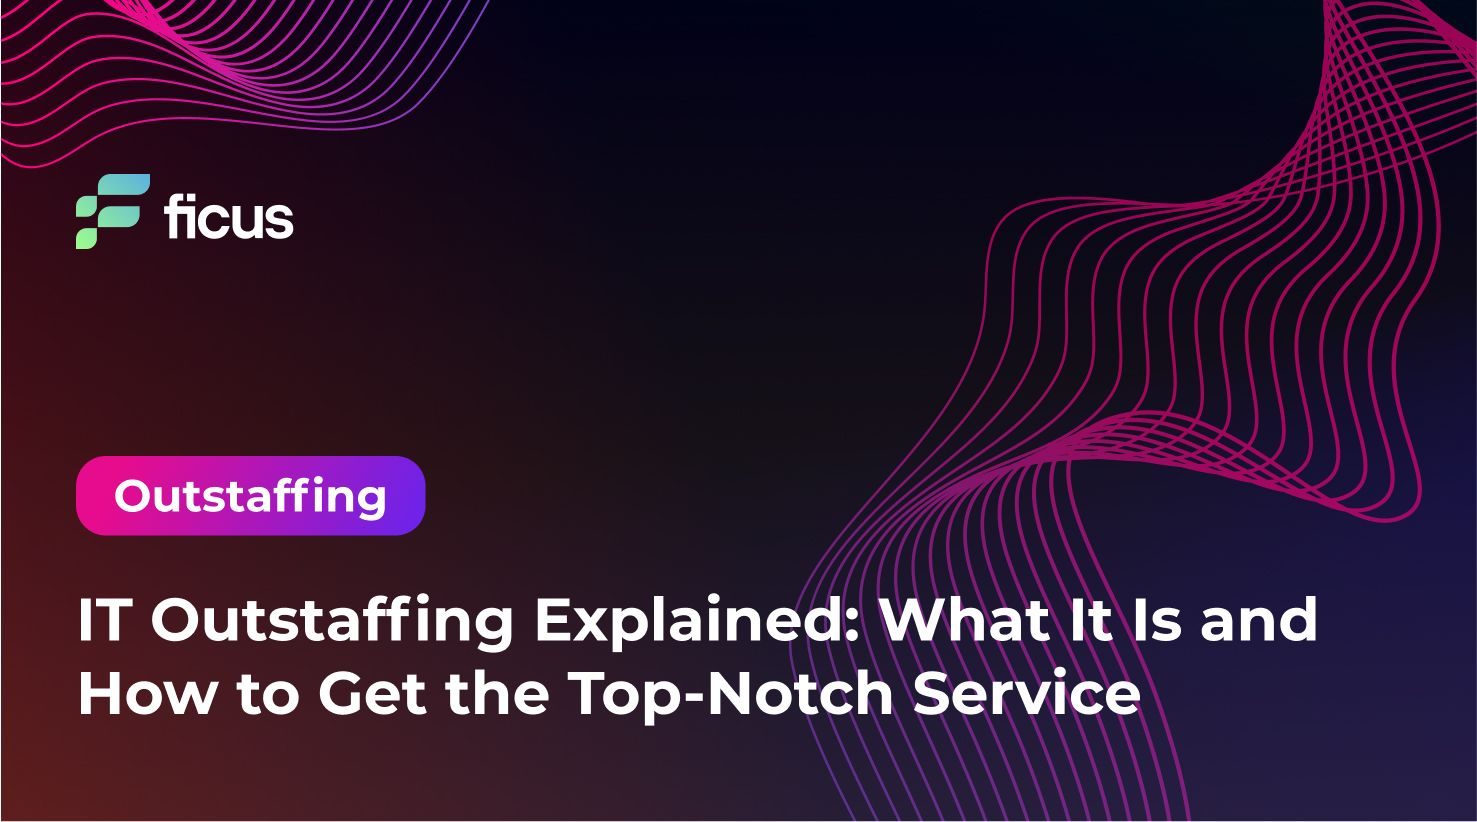 IT Outstaffing Explained: What It Is and How to Get the Top-Notch Service